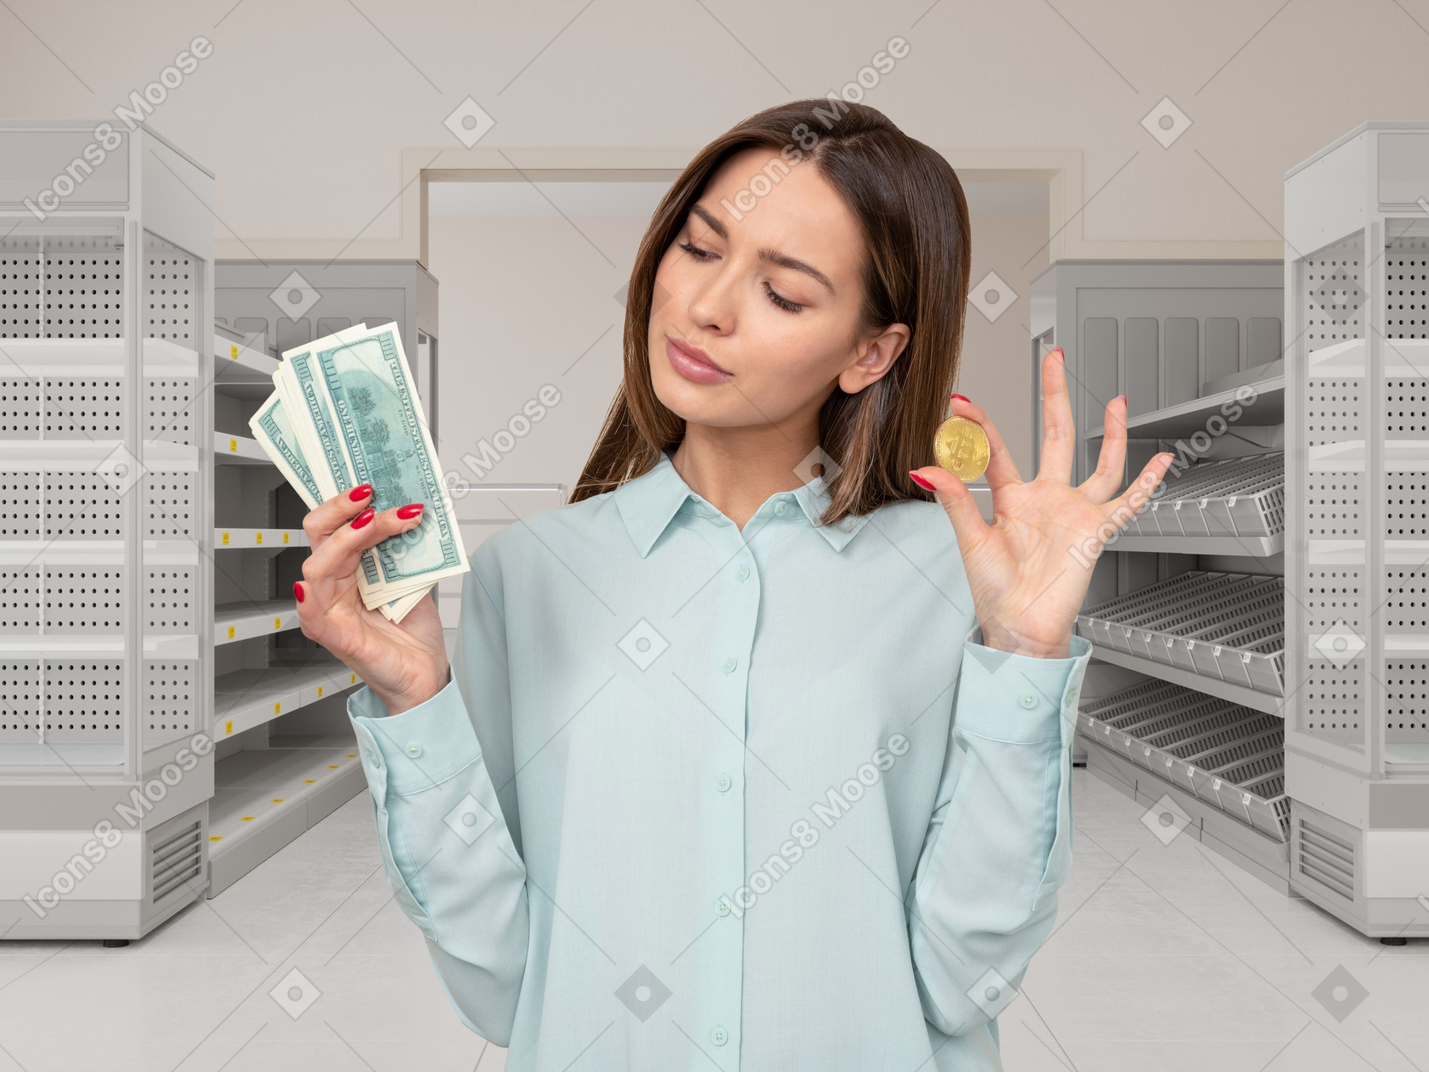 A woman holding a stack of money in a store